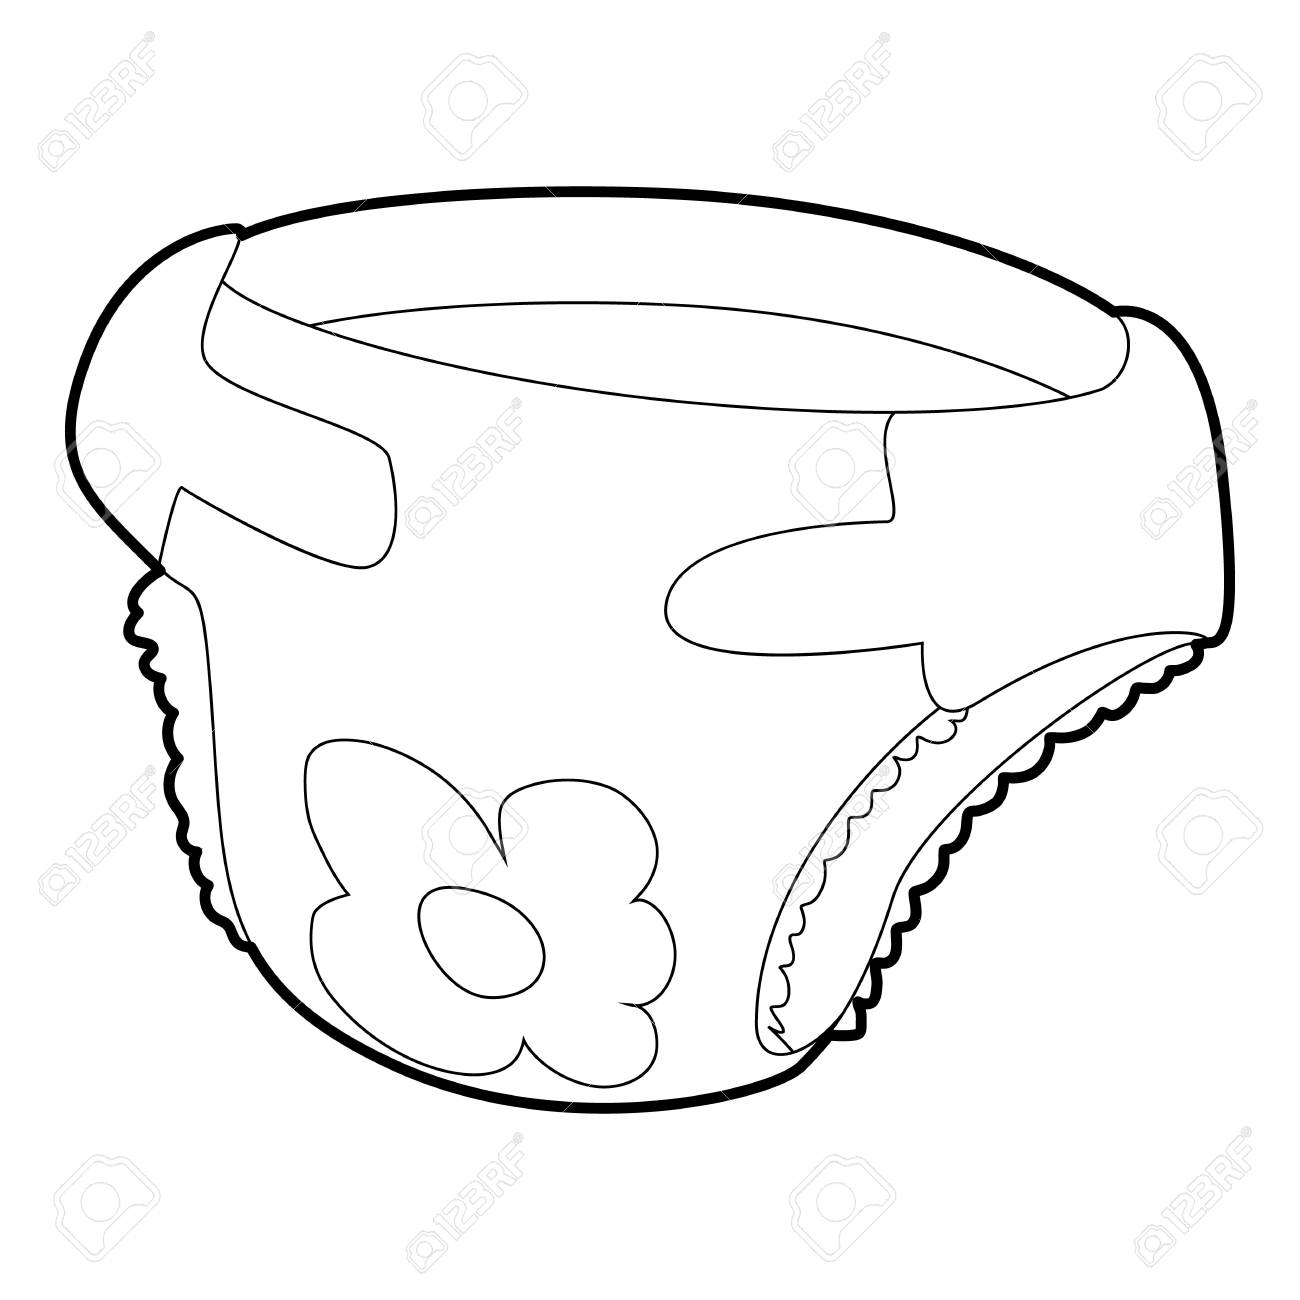 diapers clipart black and white